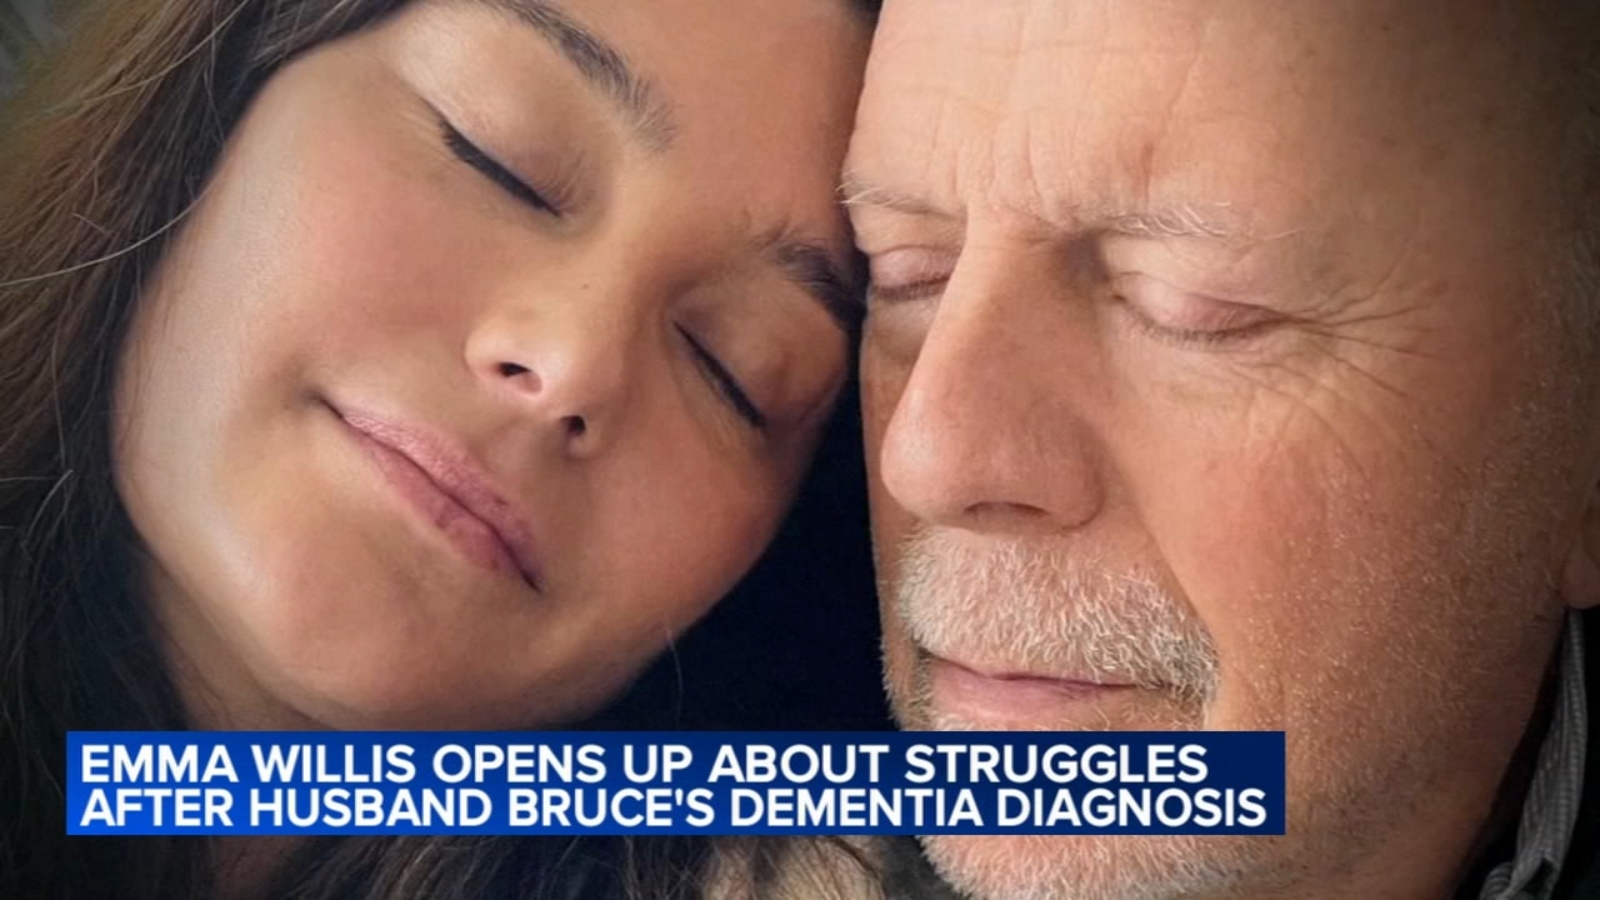 Wife of Bruce Willis shares her struggle with ‘desperately’ needing support after frontotemporal dementia diagnosis [Video]